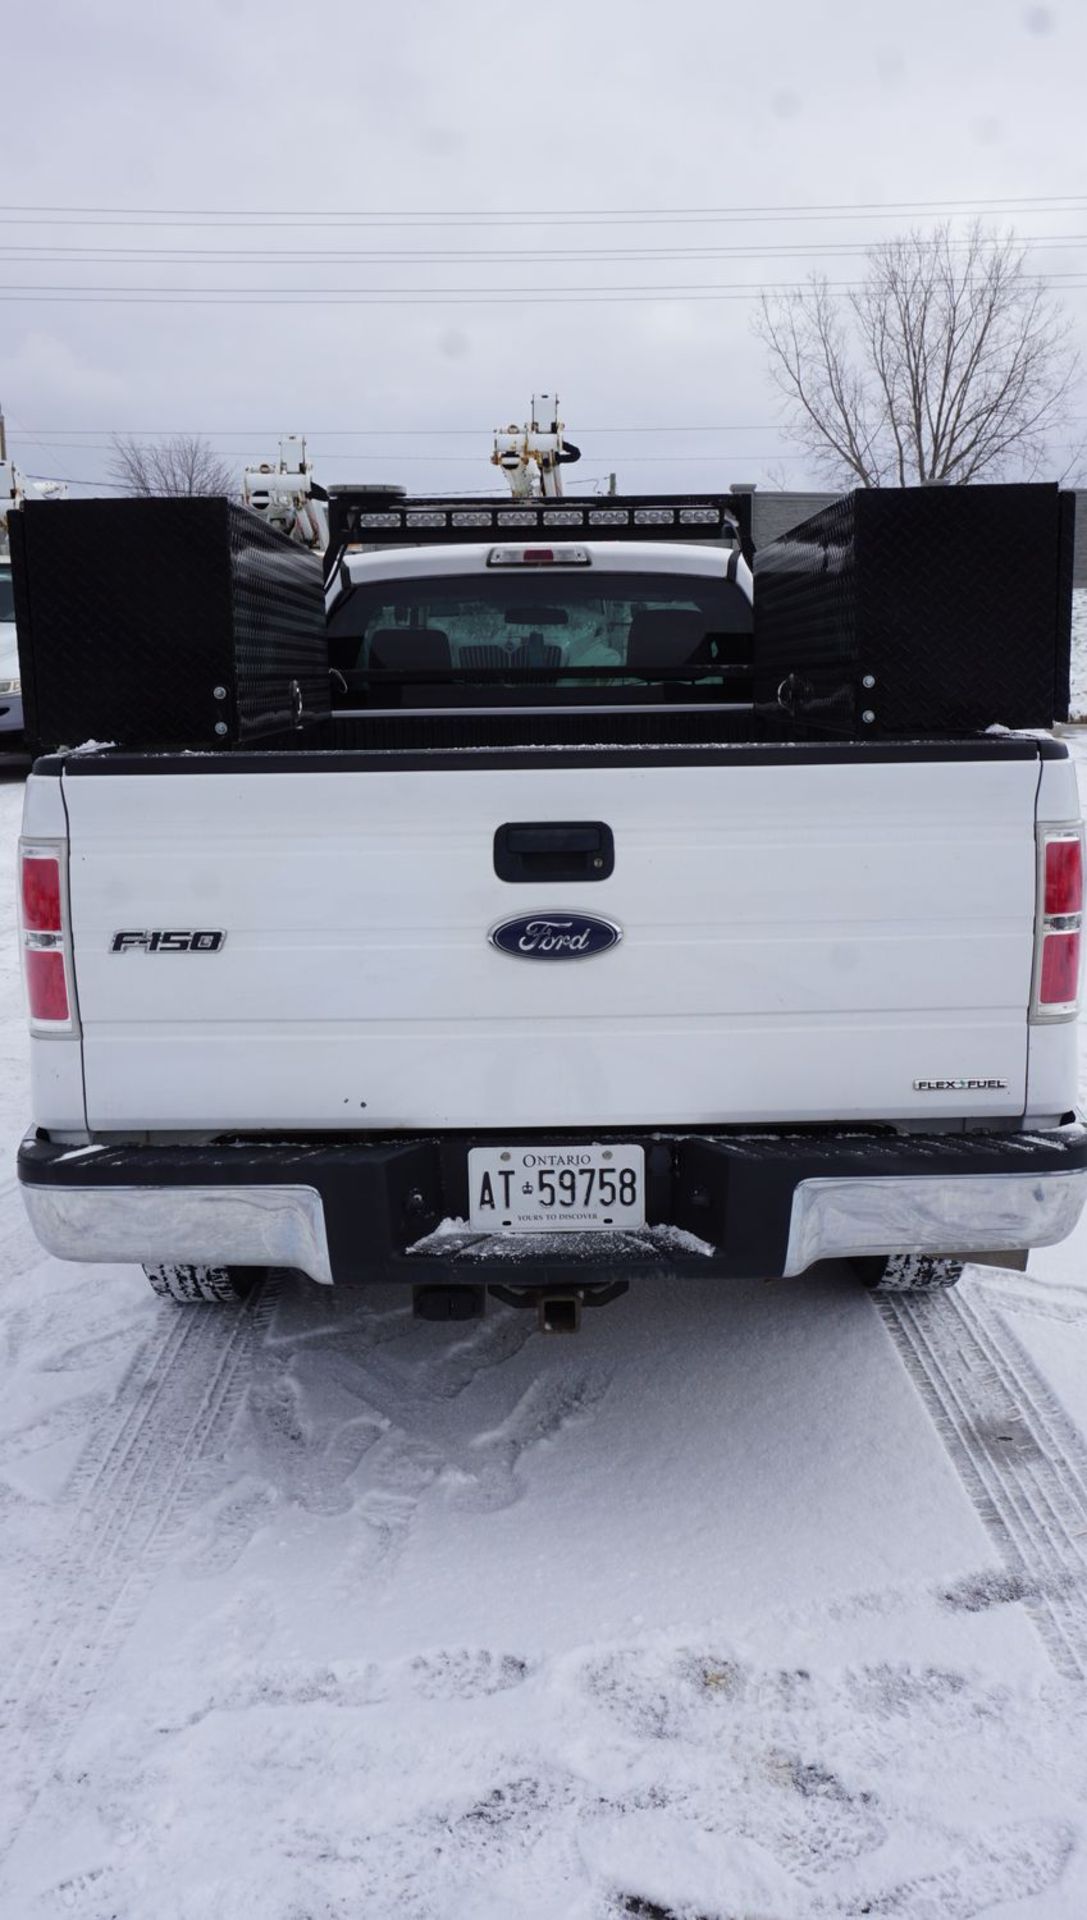 2014 FORD F150XL REG CAB 4X2 PICKUP W/ 5.0L V8 GAS ENGINE C/W (2) WEATHER GUARD HI-SIDE TOOL BOXES, - Image 6 of 8